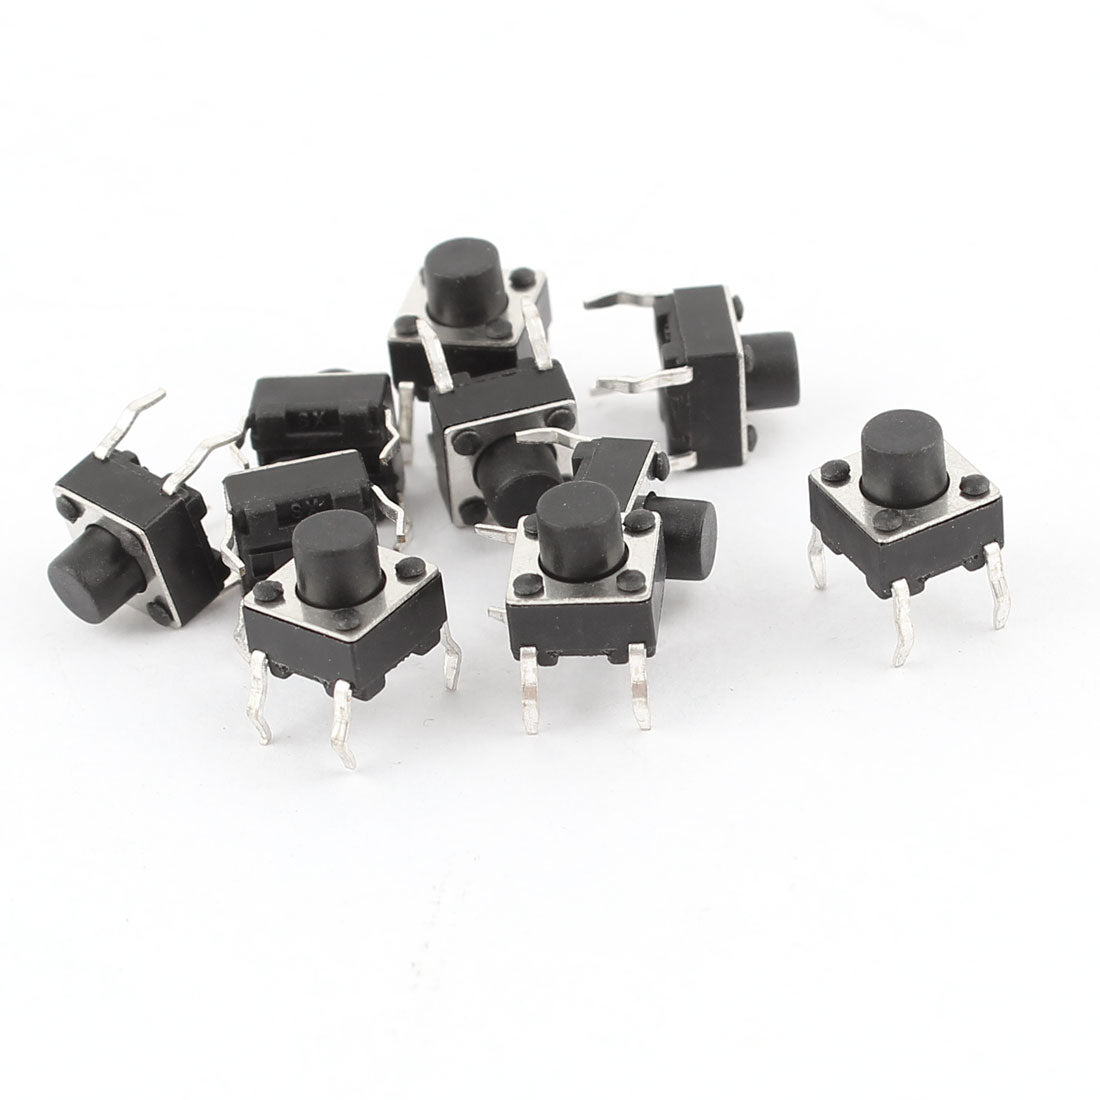 Uxcell Uxcell 10 Pcs 6 x 6 x 6mm Momentary 4Pin DIP Micro PCB Round Button Tact Switch 2mm Height Knob